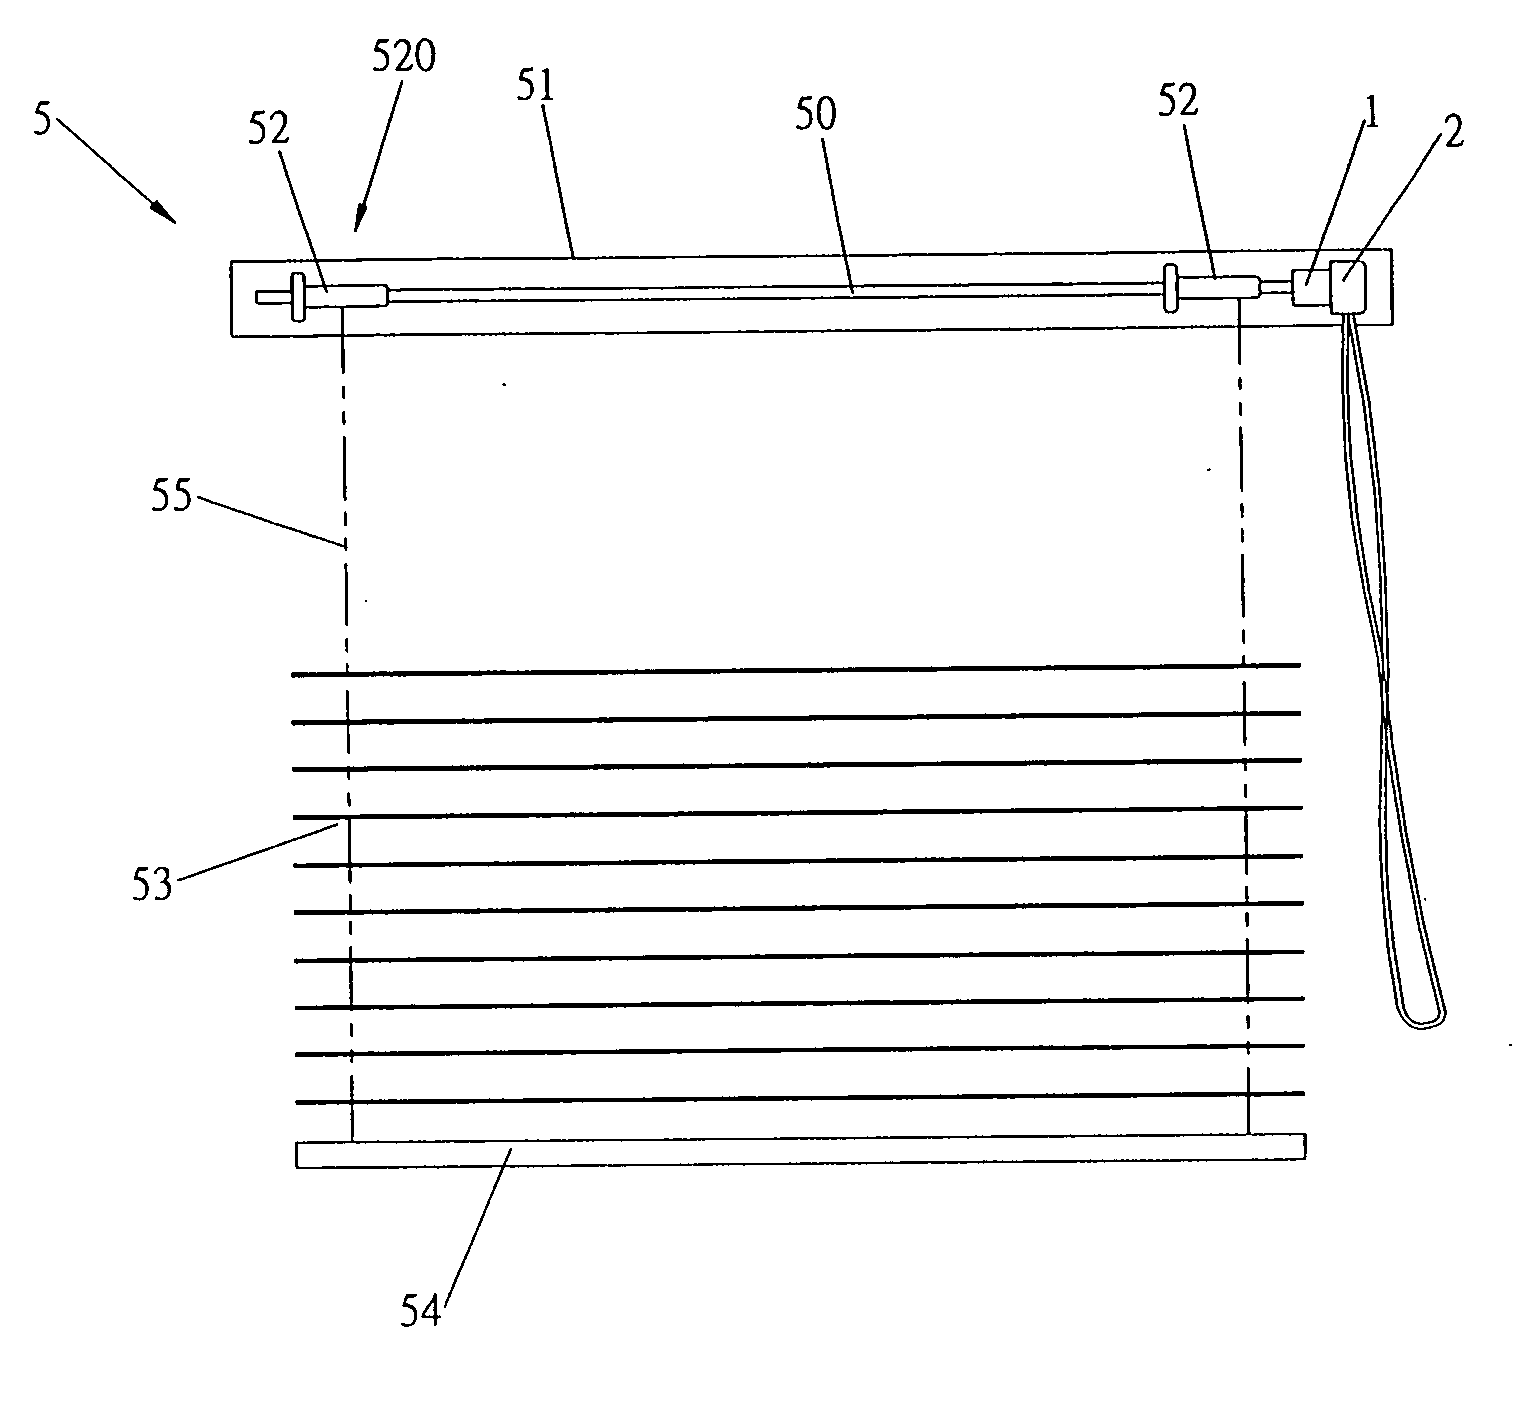 Brake mechanism for curtain linkage system